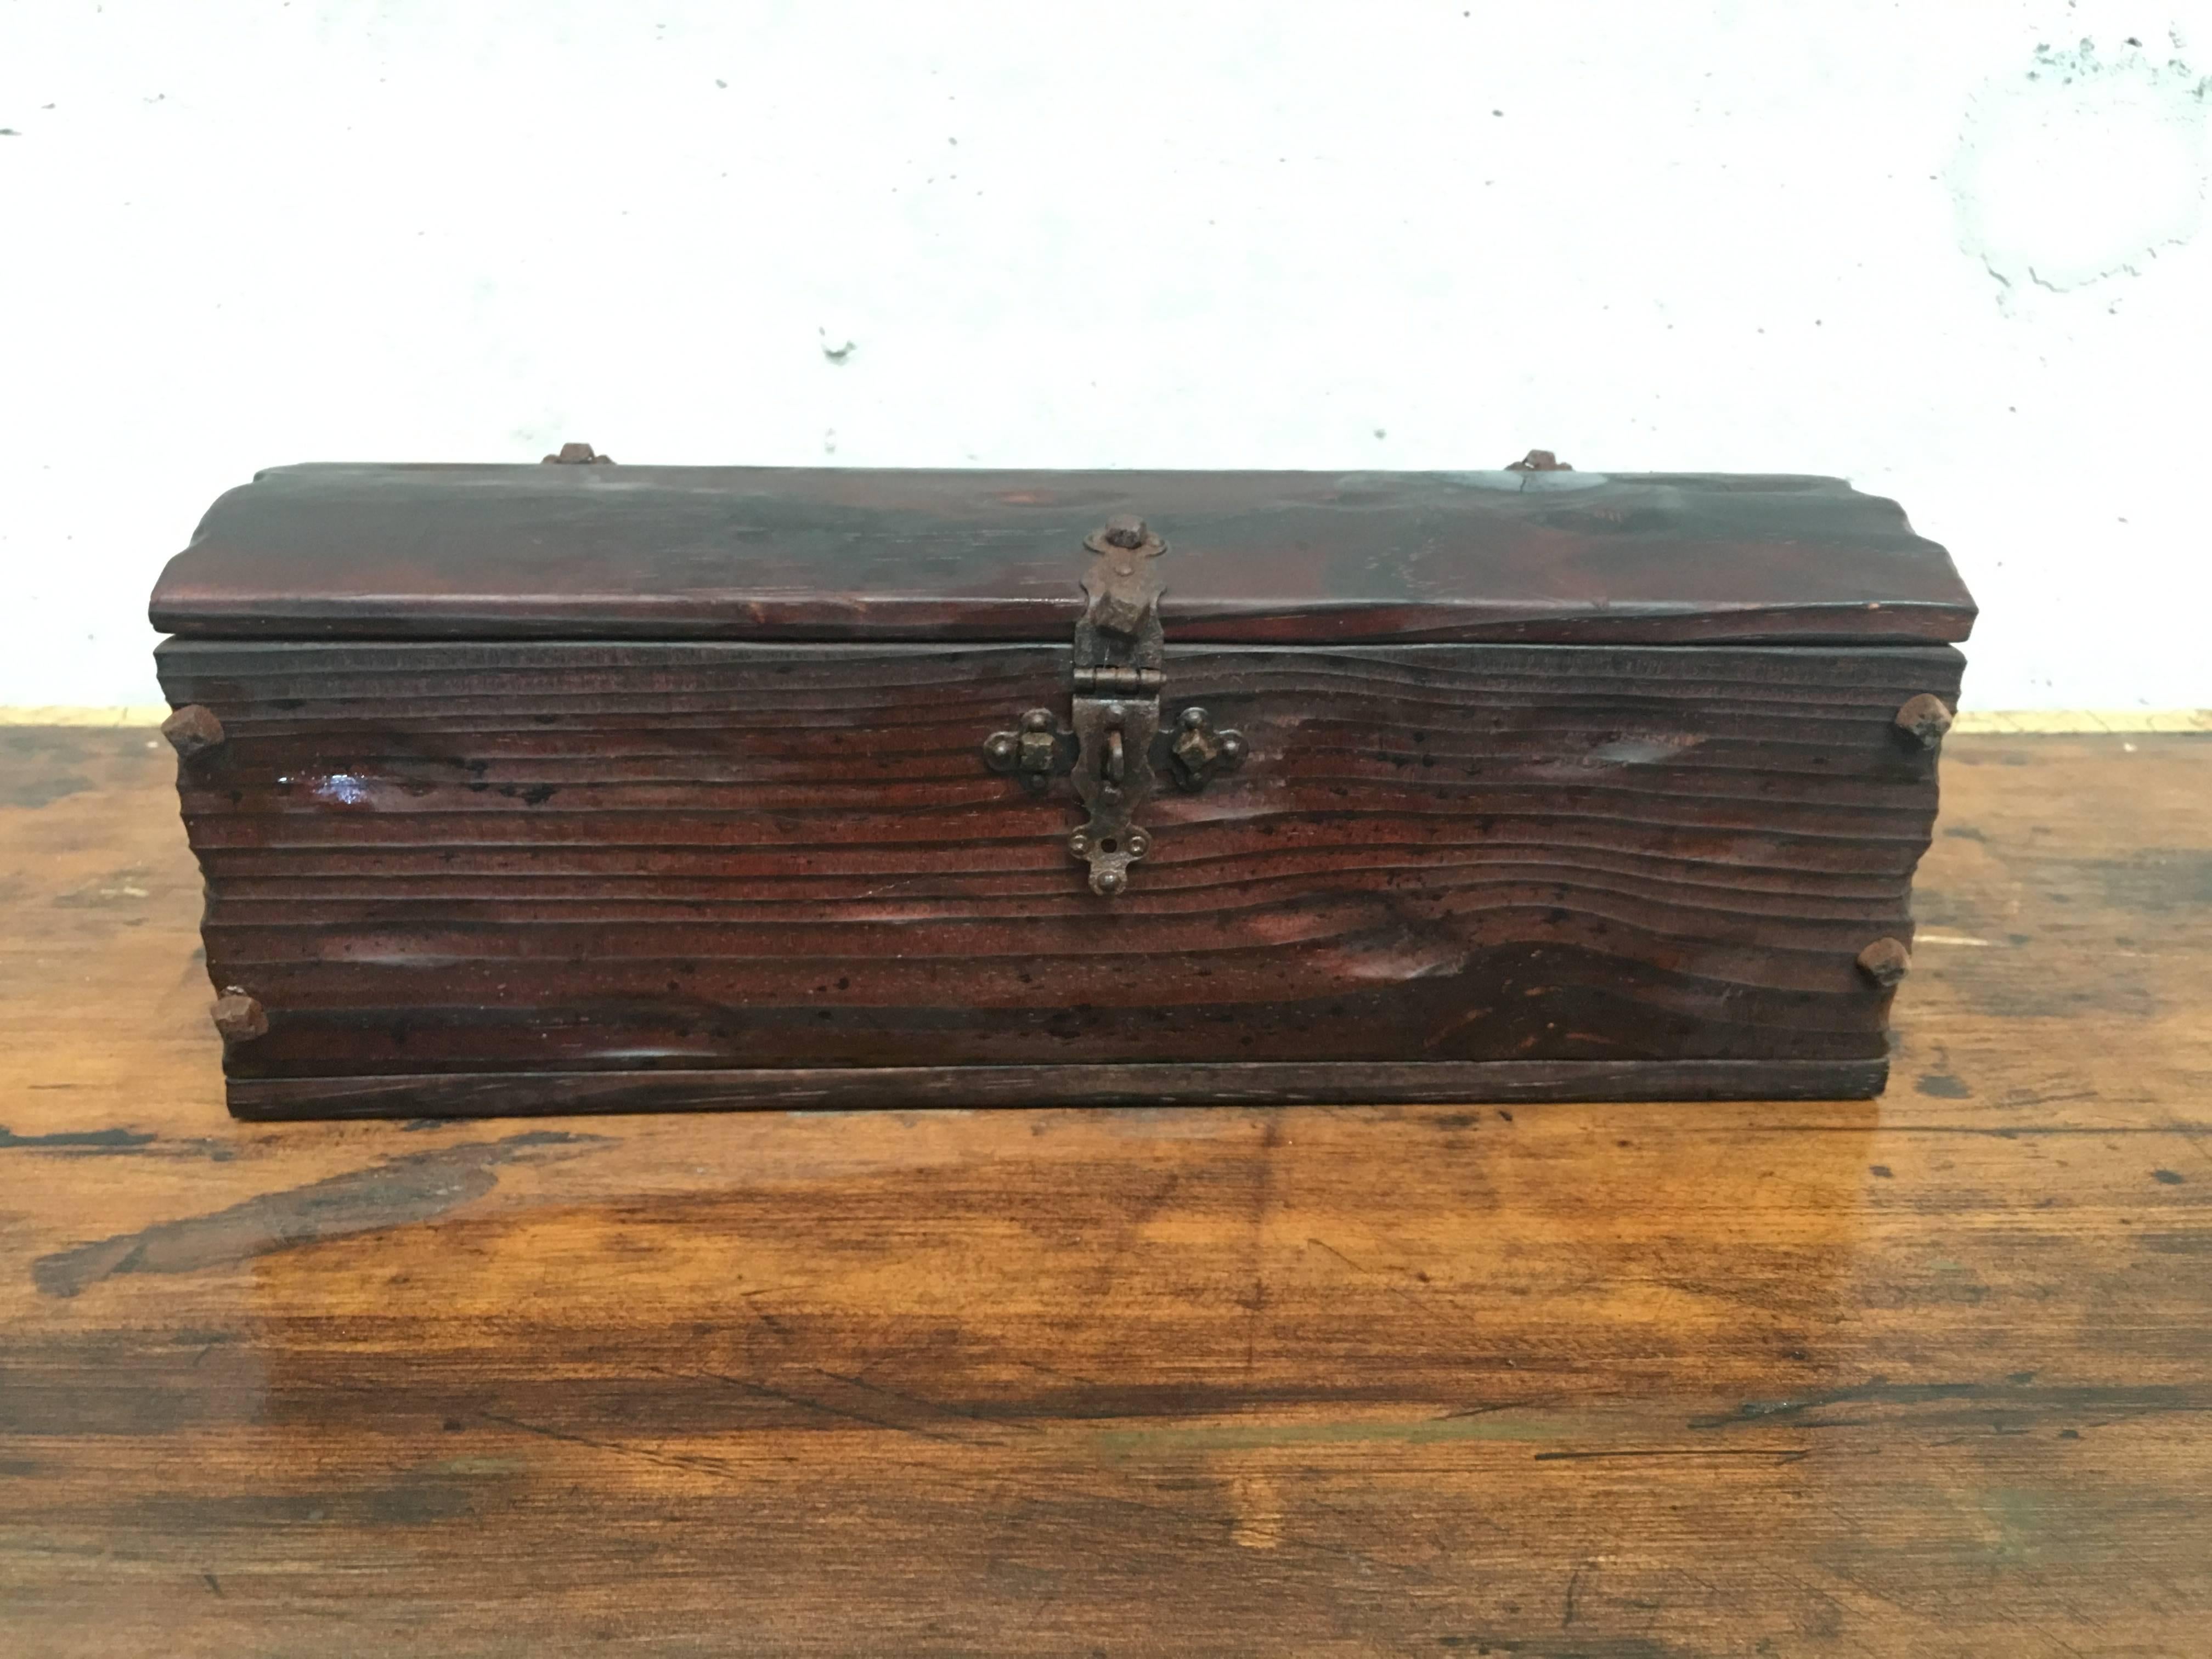 This antique oak table trunk is from Spain and dates to the 1700s. The top is attached to the back panel with two wrought iron hinges with decorative straps. It is interesting to note that there are slightly different variations of similar carvings